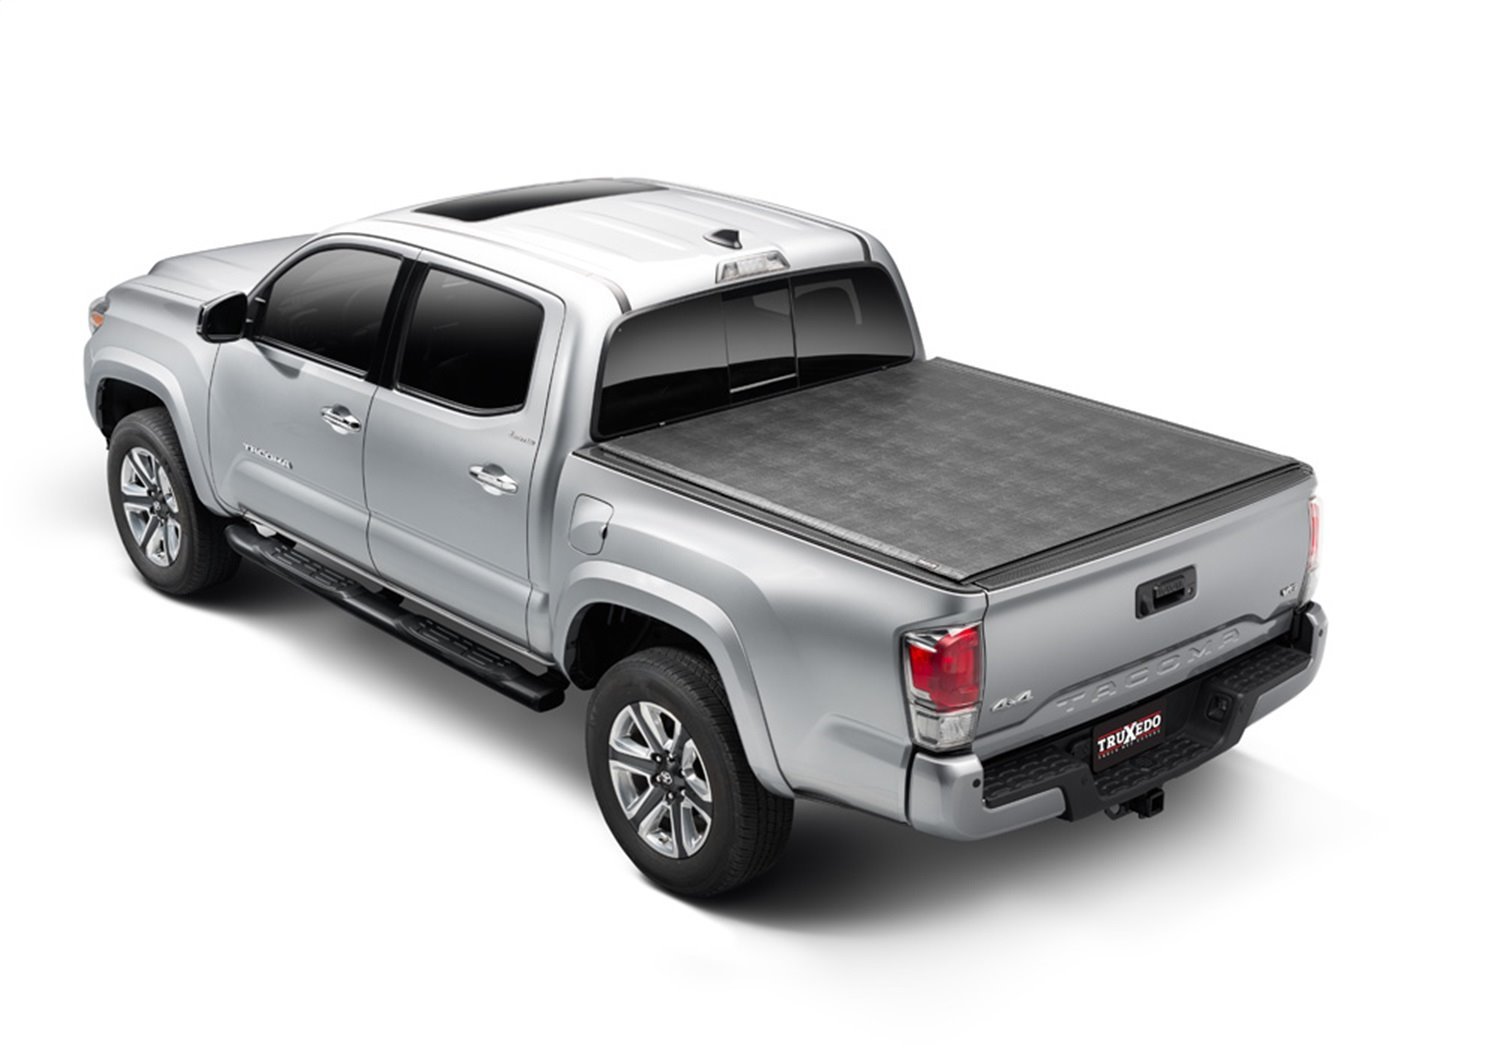 Sentry Roll-Up Tonneau Cover Fits Select Toyota Tundra, Without Deck Rail System, Bed Length: 5 ft. 6 in.